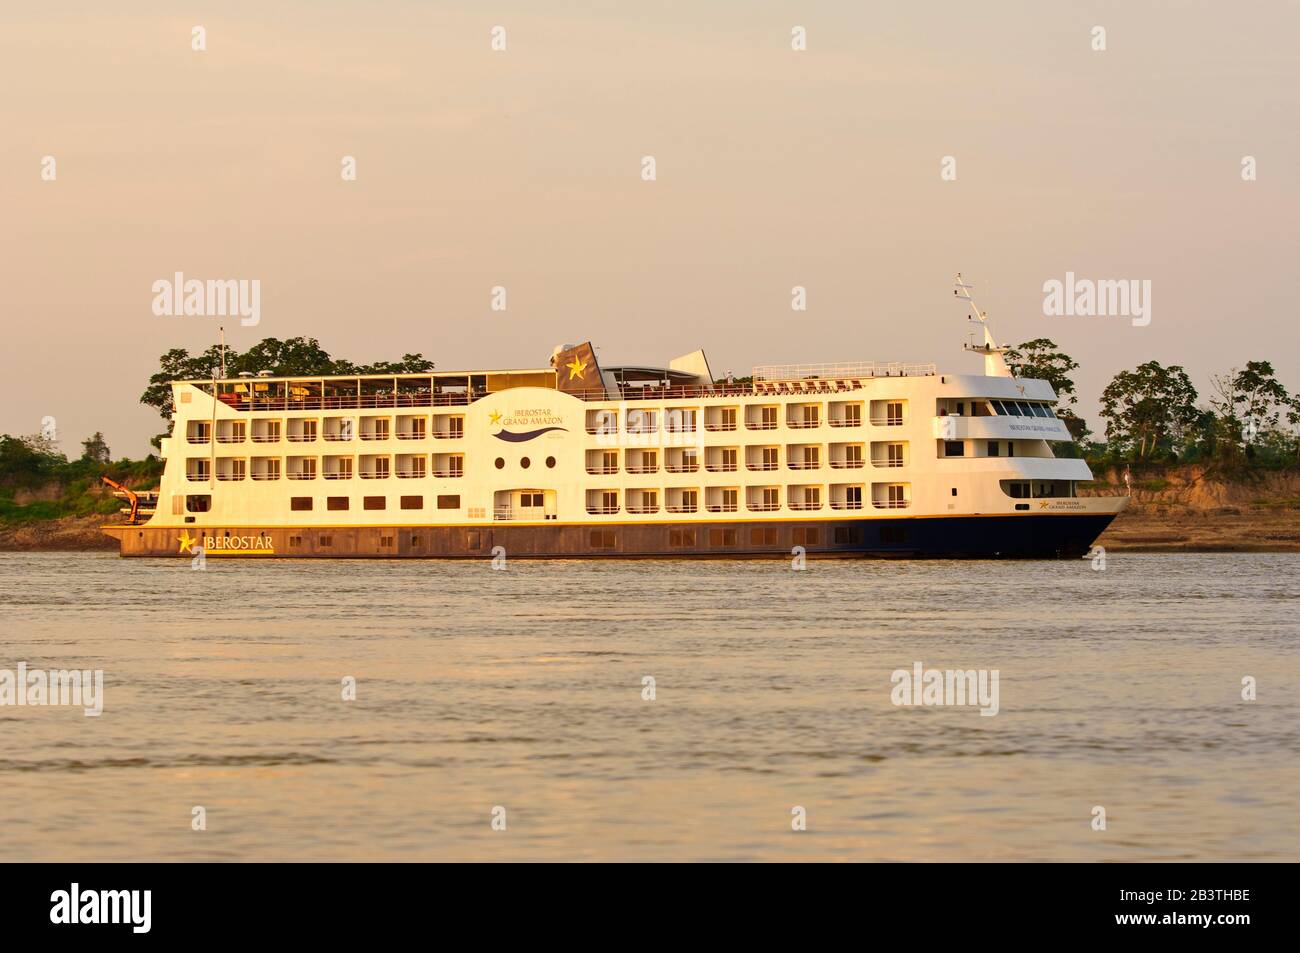 Page 4 - Luxus Schiff High Resolution Stock Photography and Images - Alamy